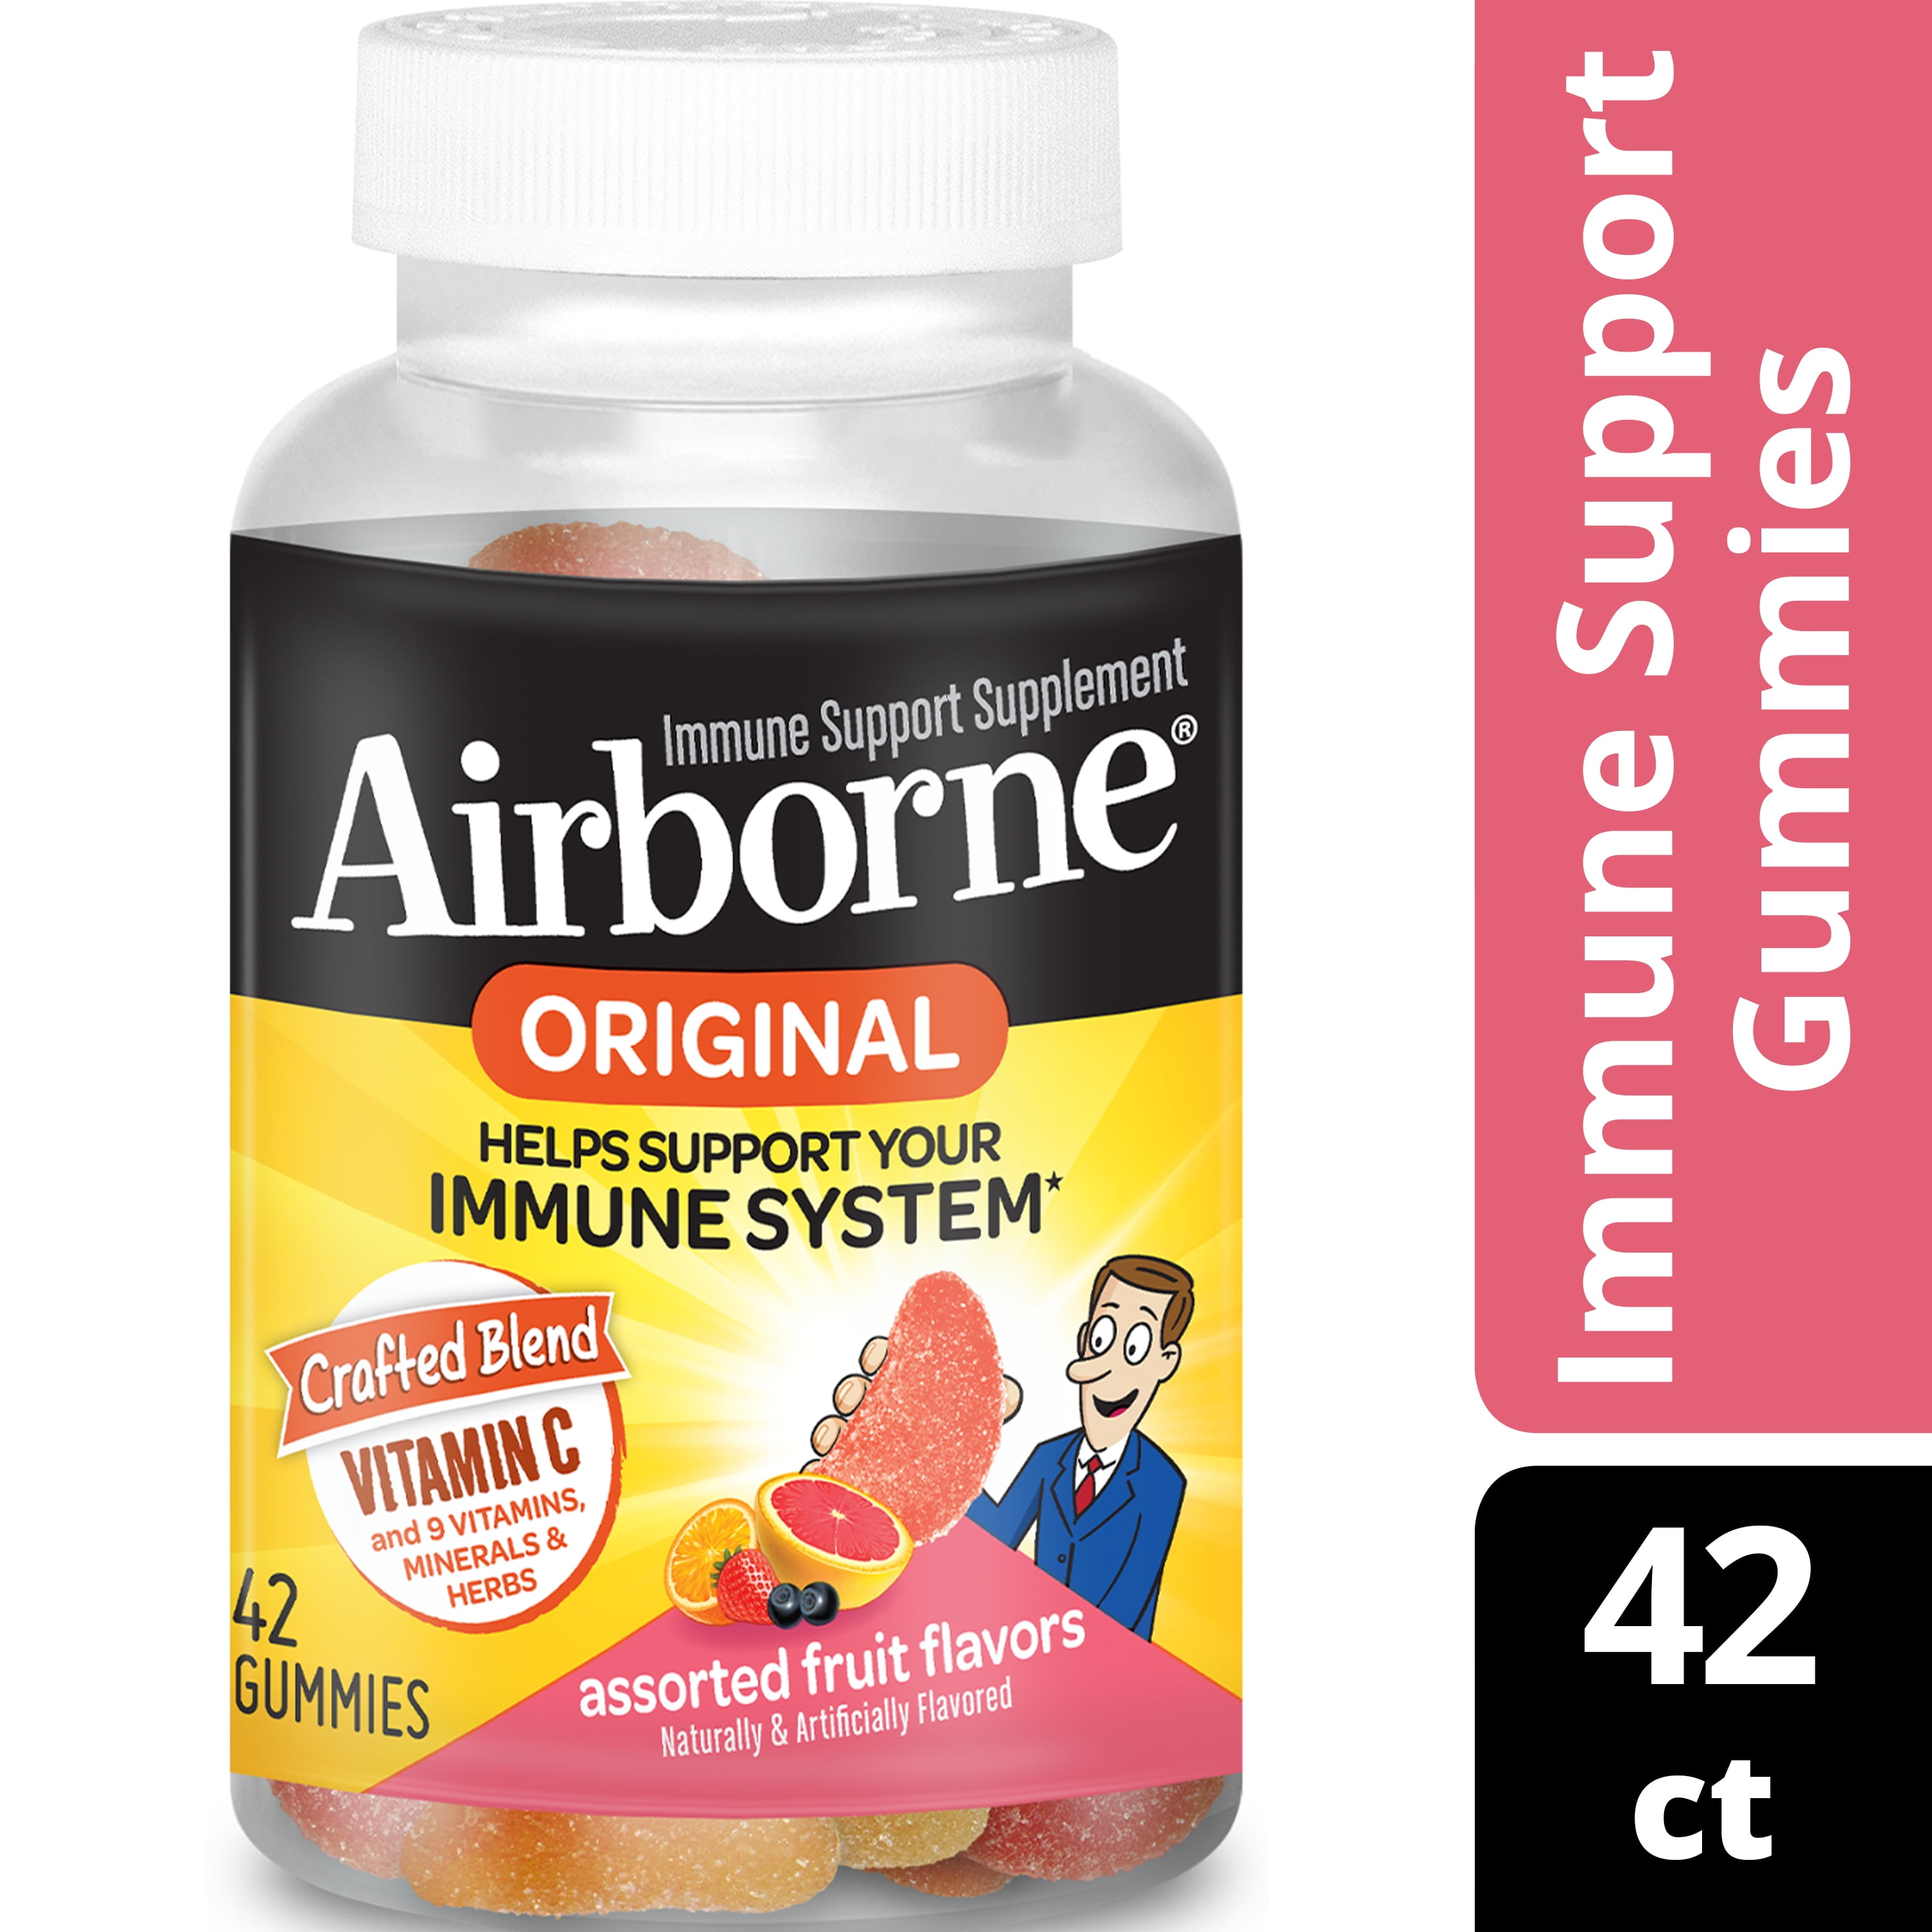 Airborne Assorted Fruit Flavored Gummies, 42 count - 750mg of Vitamin C and Minerals & Herbs Immune Support (Packaging May Vary)